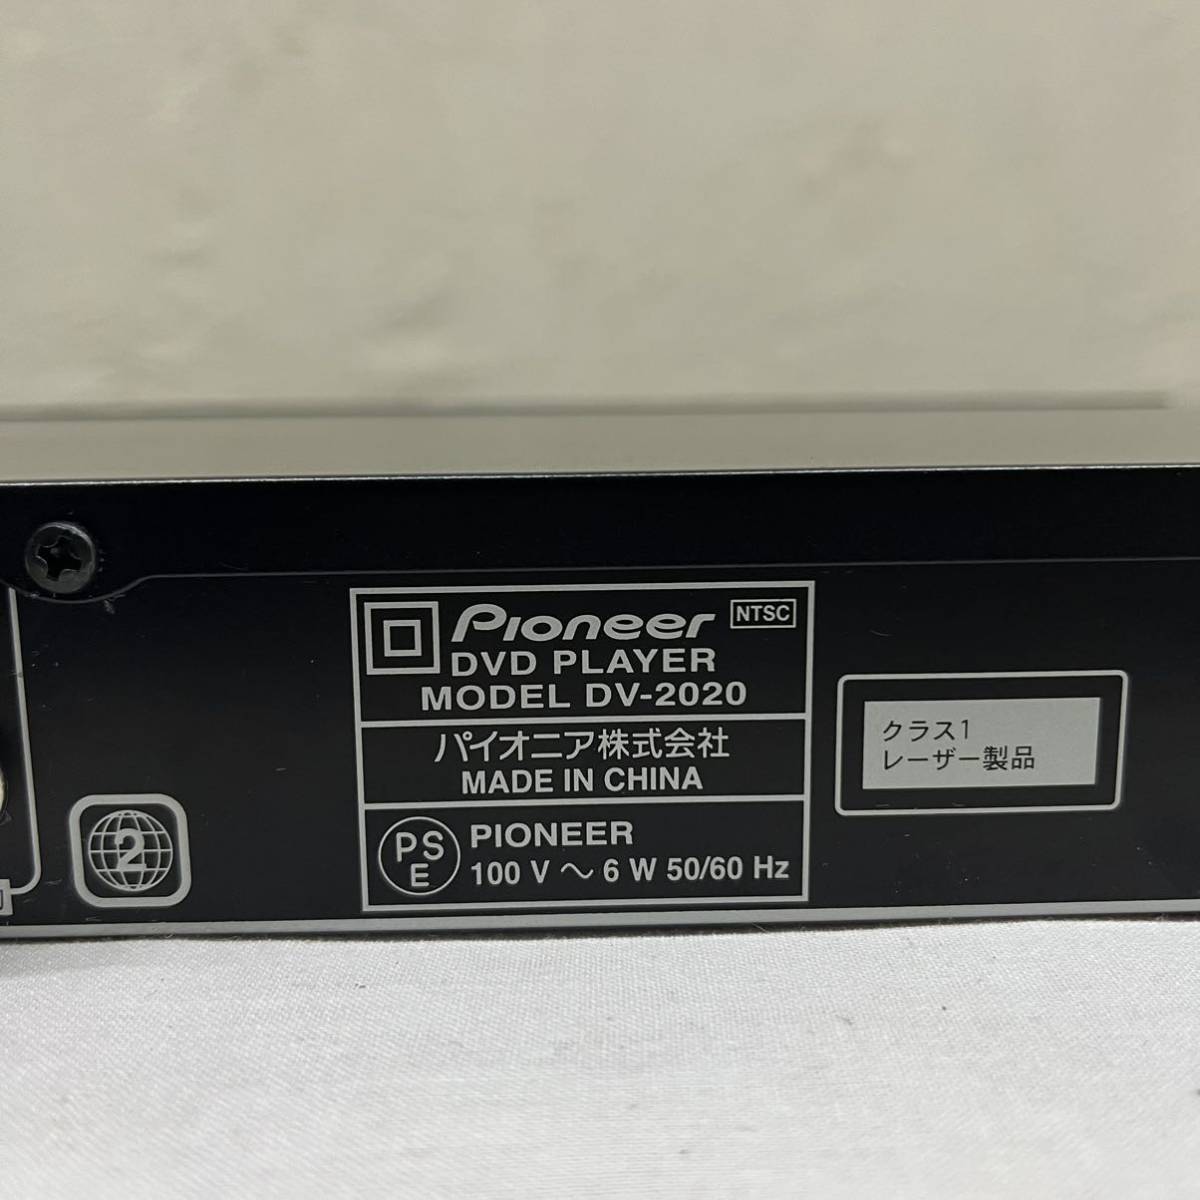 Ploneer DVD PRAYER DV-2020 RW COMPATIBLE video Pioneer corporation 100V 6W 50/60Hz 14 year made Laser product 